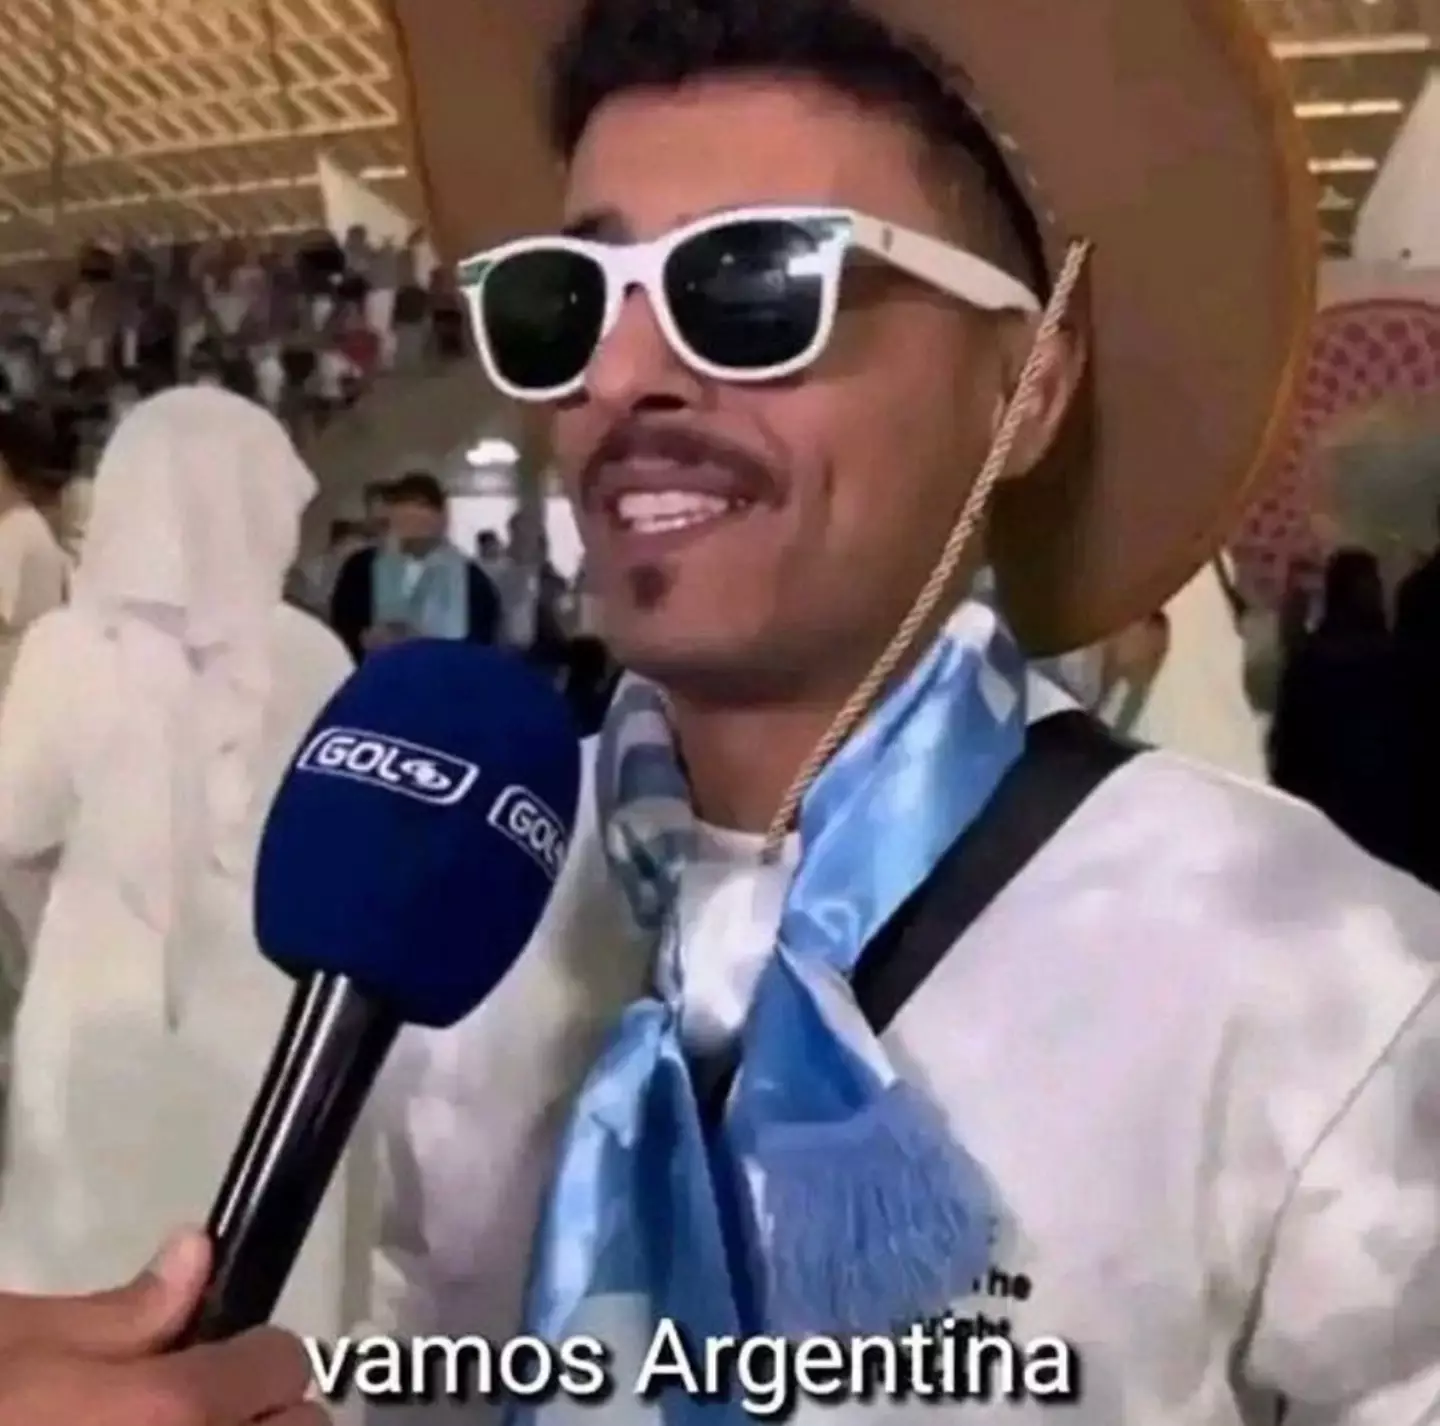 The fan in his Argentina gear. (Image